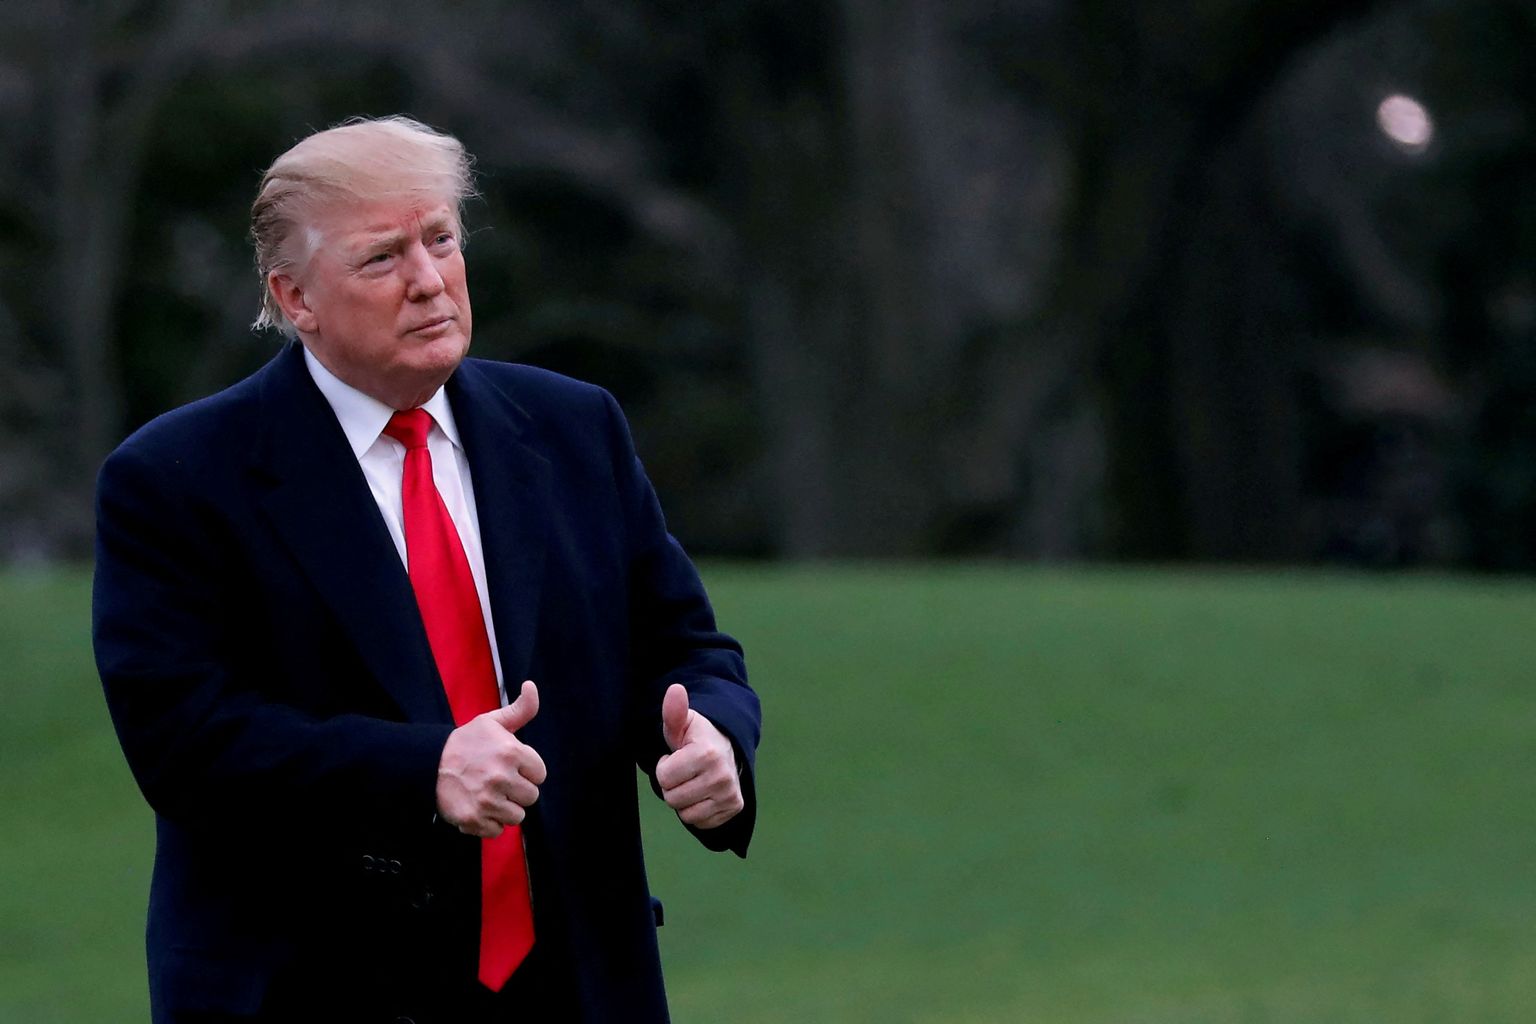 FILE PHOTO: U.S. President Donald Trump reacts as he returns to the White House after U.S. Attorney General William Barr reported to congressional leaders on the submission of the report of Special Counsel Robert Mueller in Washington, U.S., March 24, 2019. REUTERS/Carlos Barria/File Photo